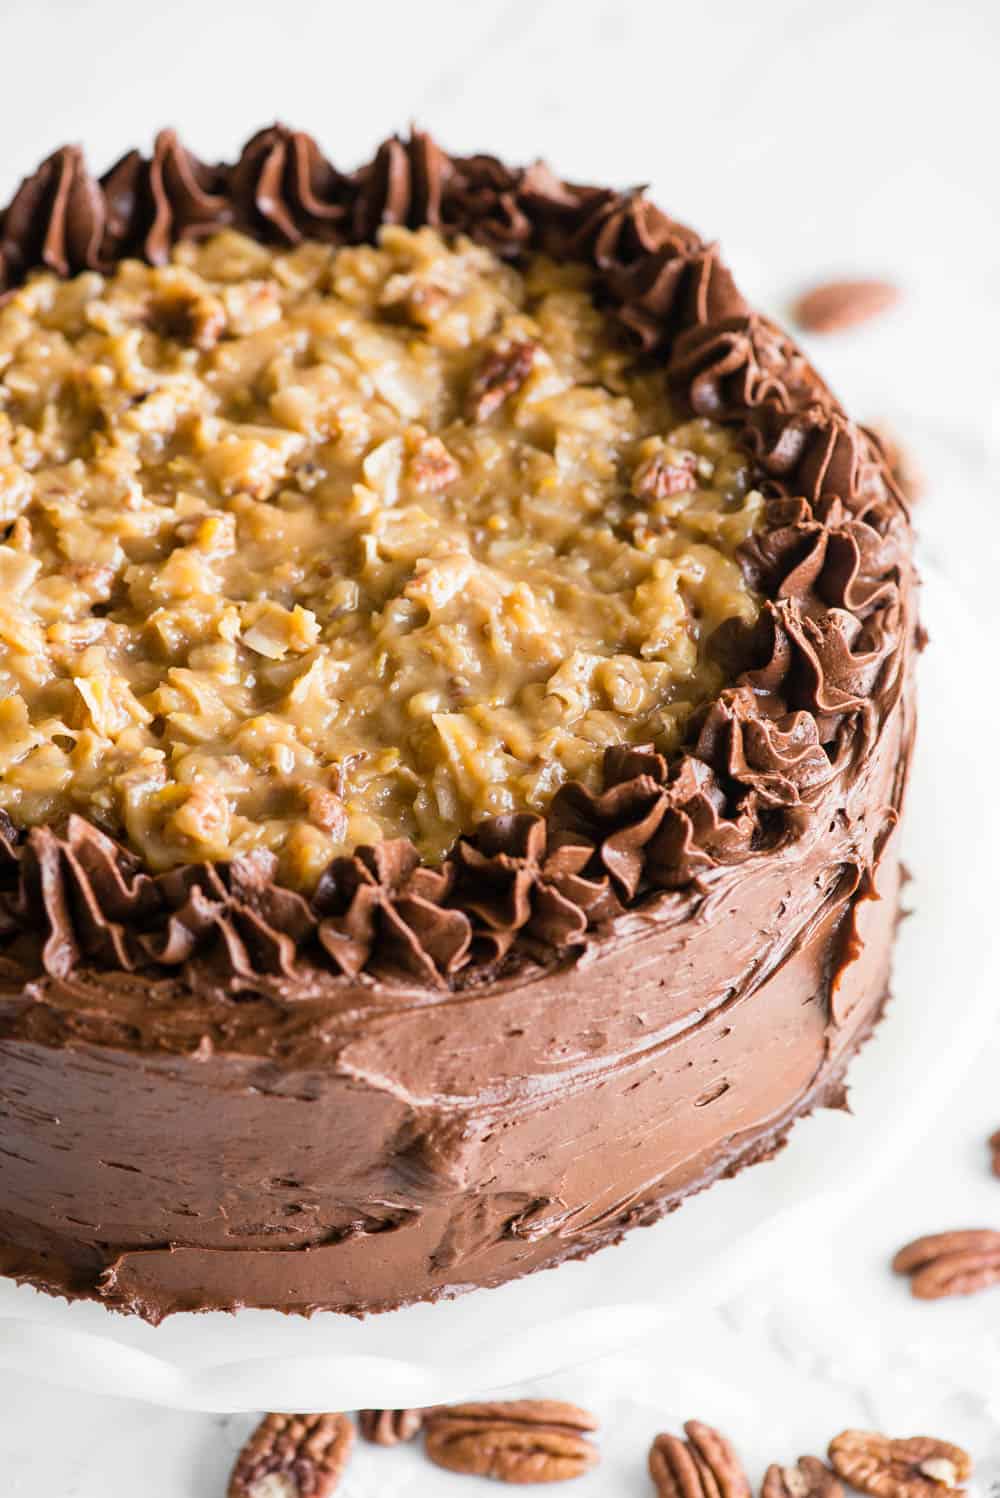 German Chocolate Cake with coconut pecan topping and chocolate frosting